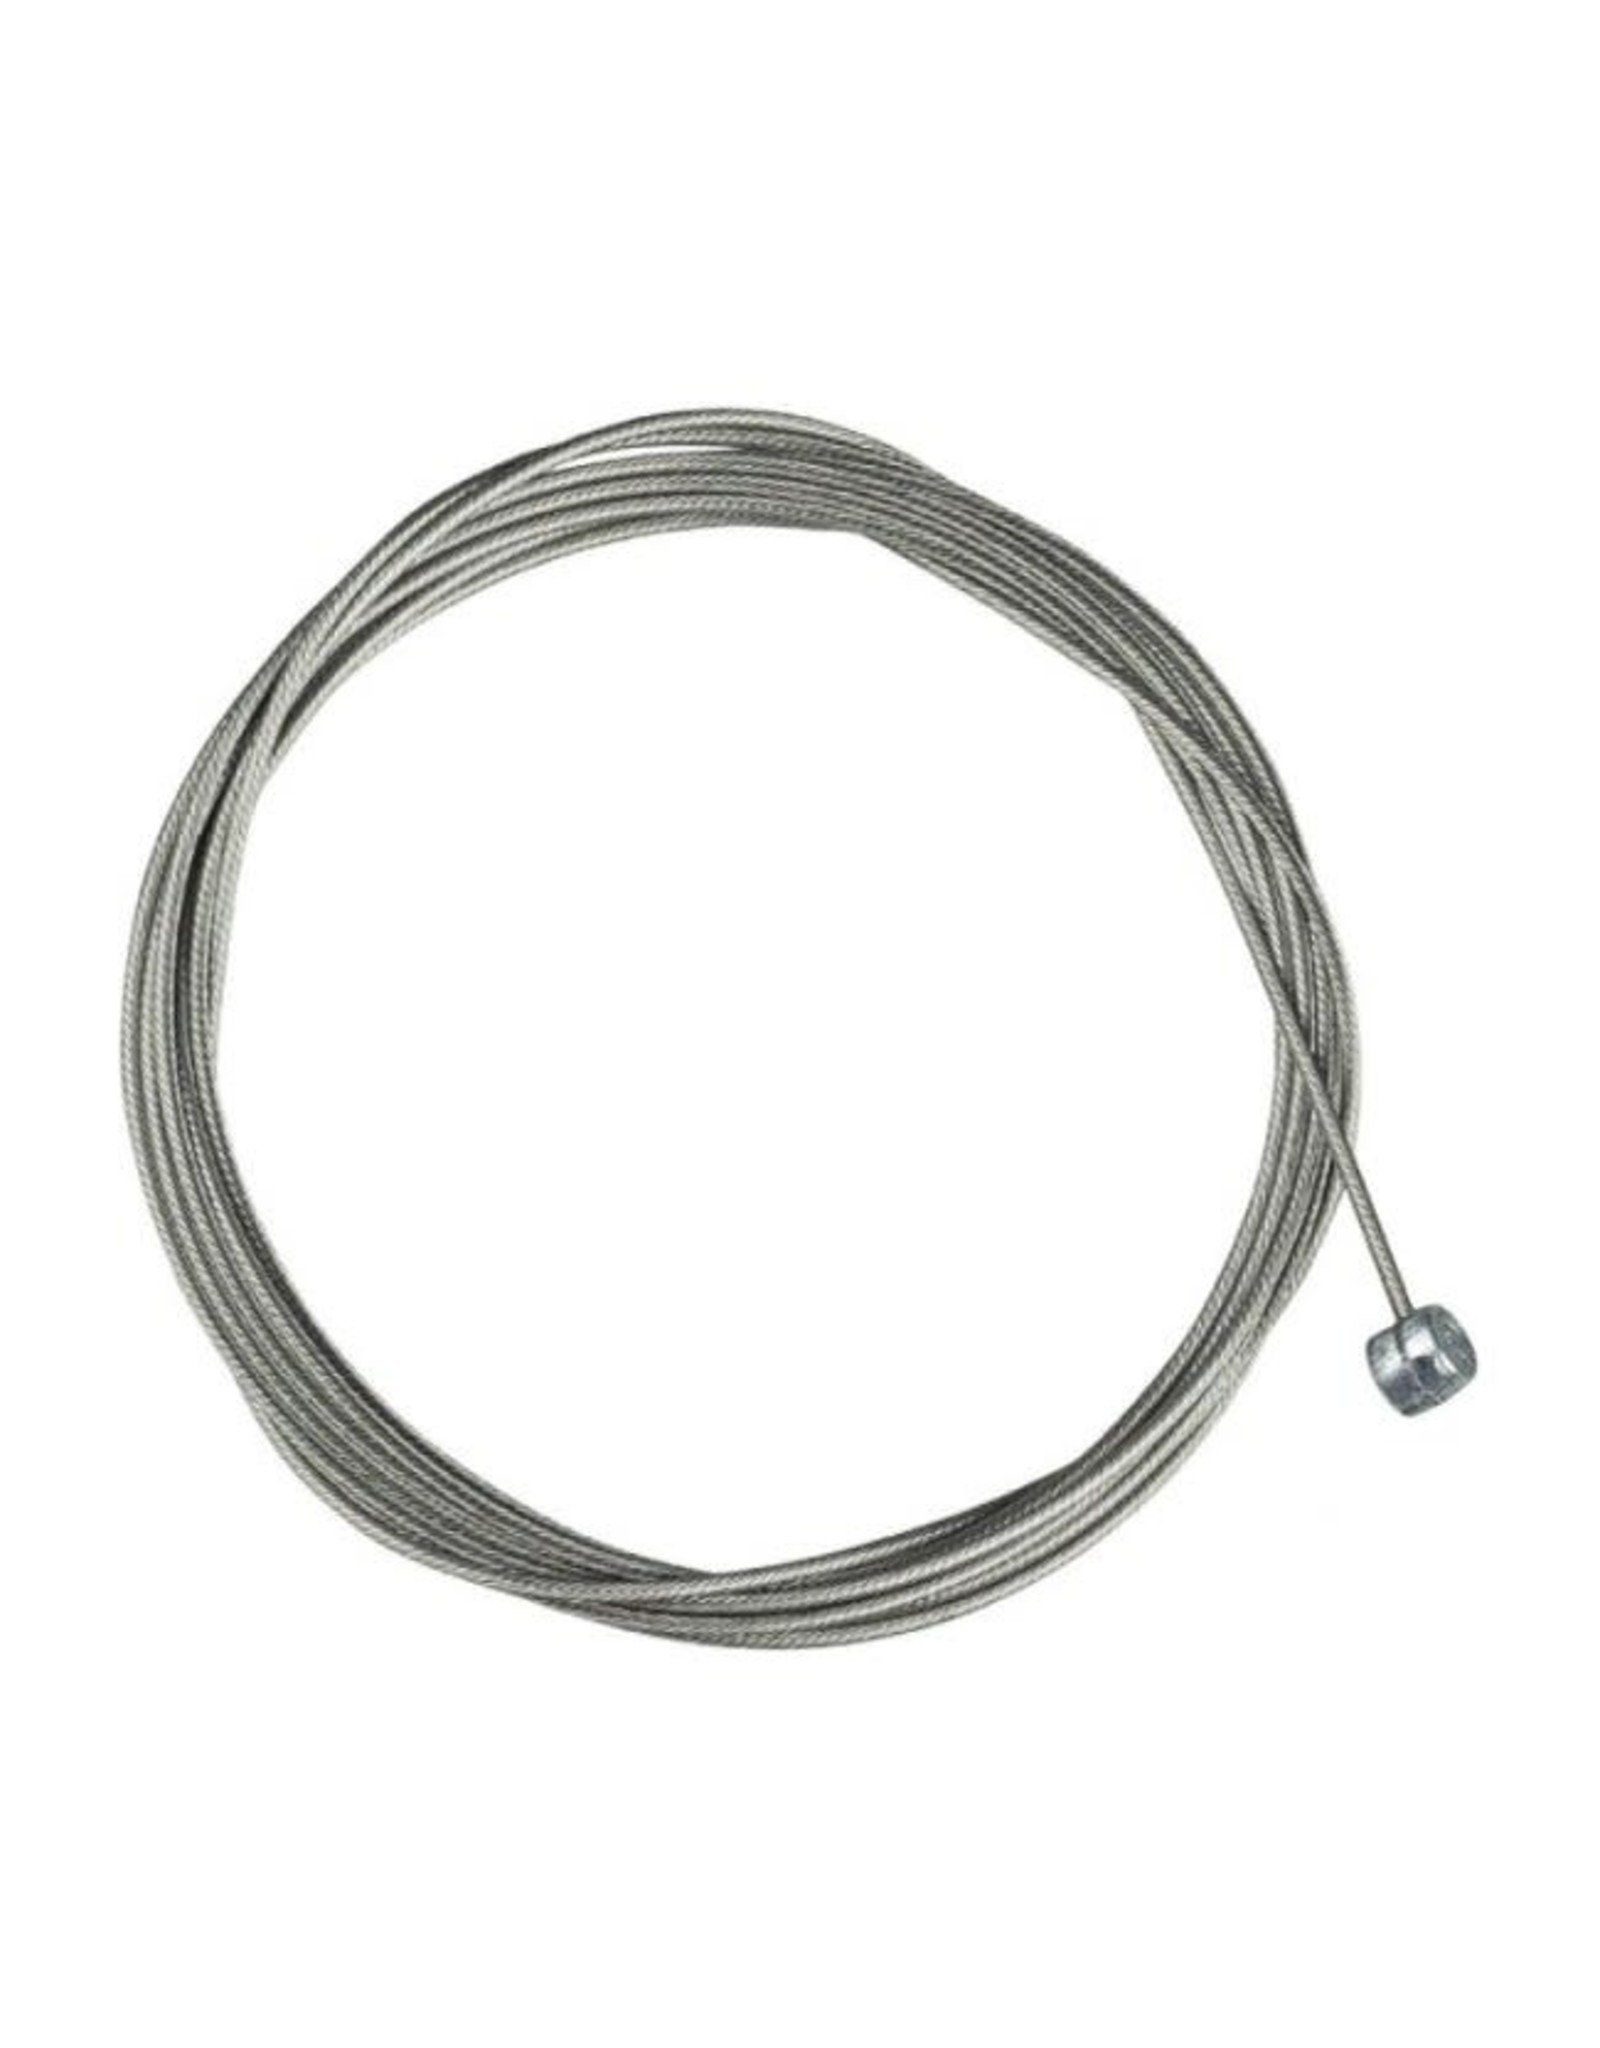 Brake Cable MTB Stainless Steel